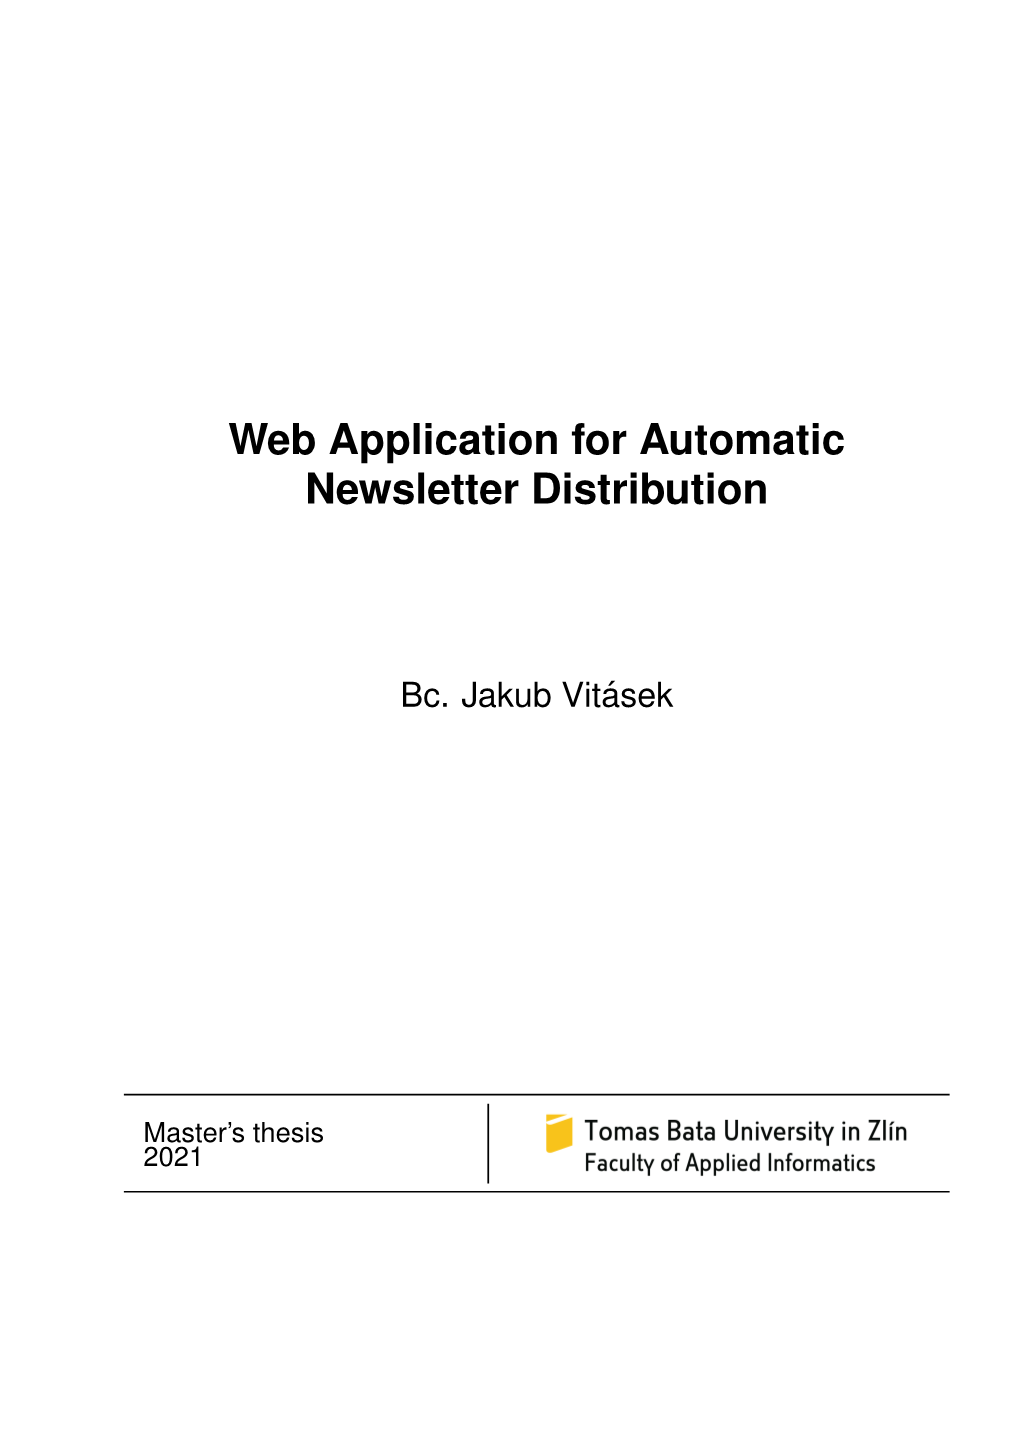 Web Application for Automatic Newsletter Distribution